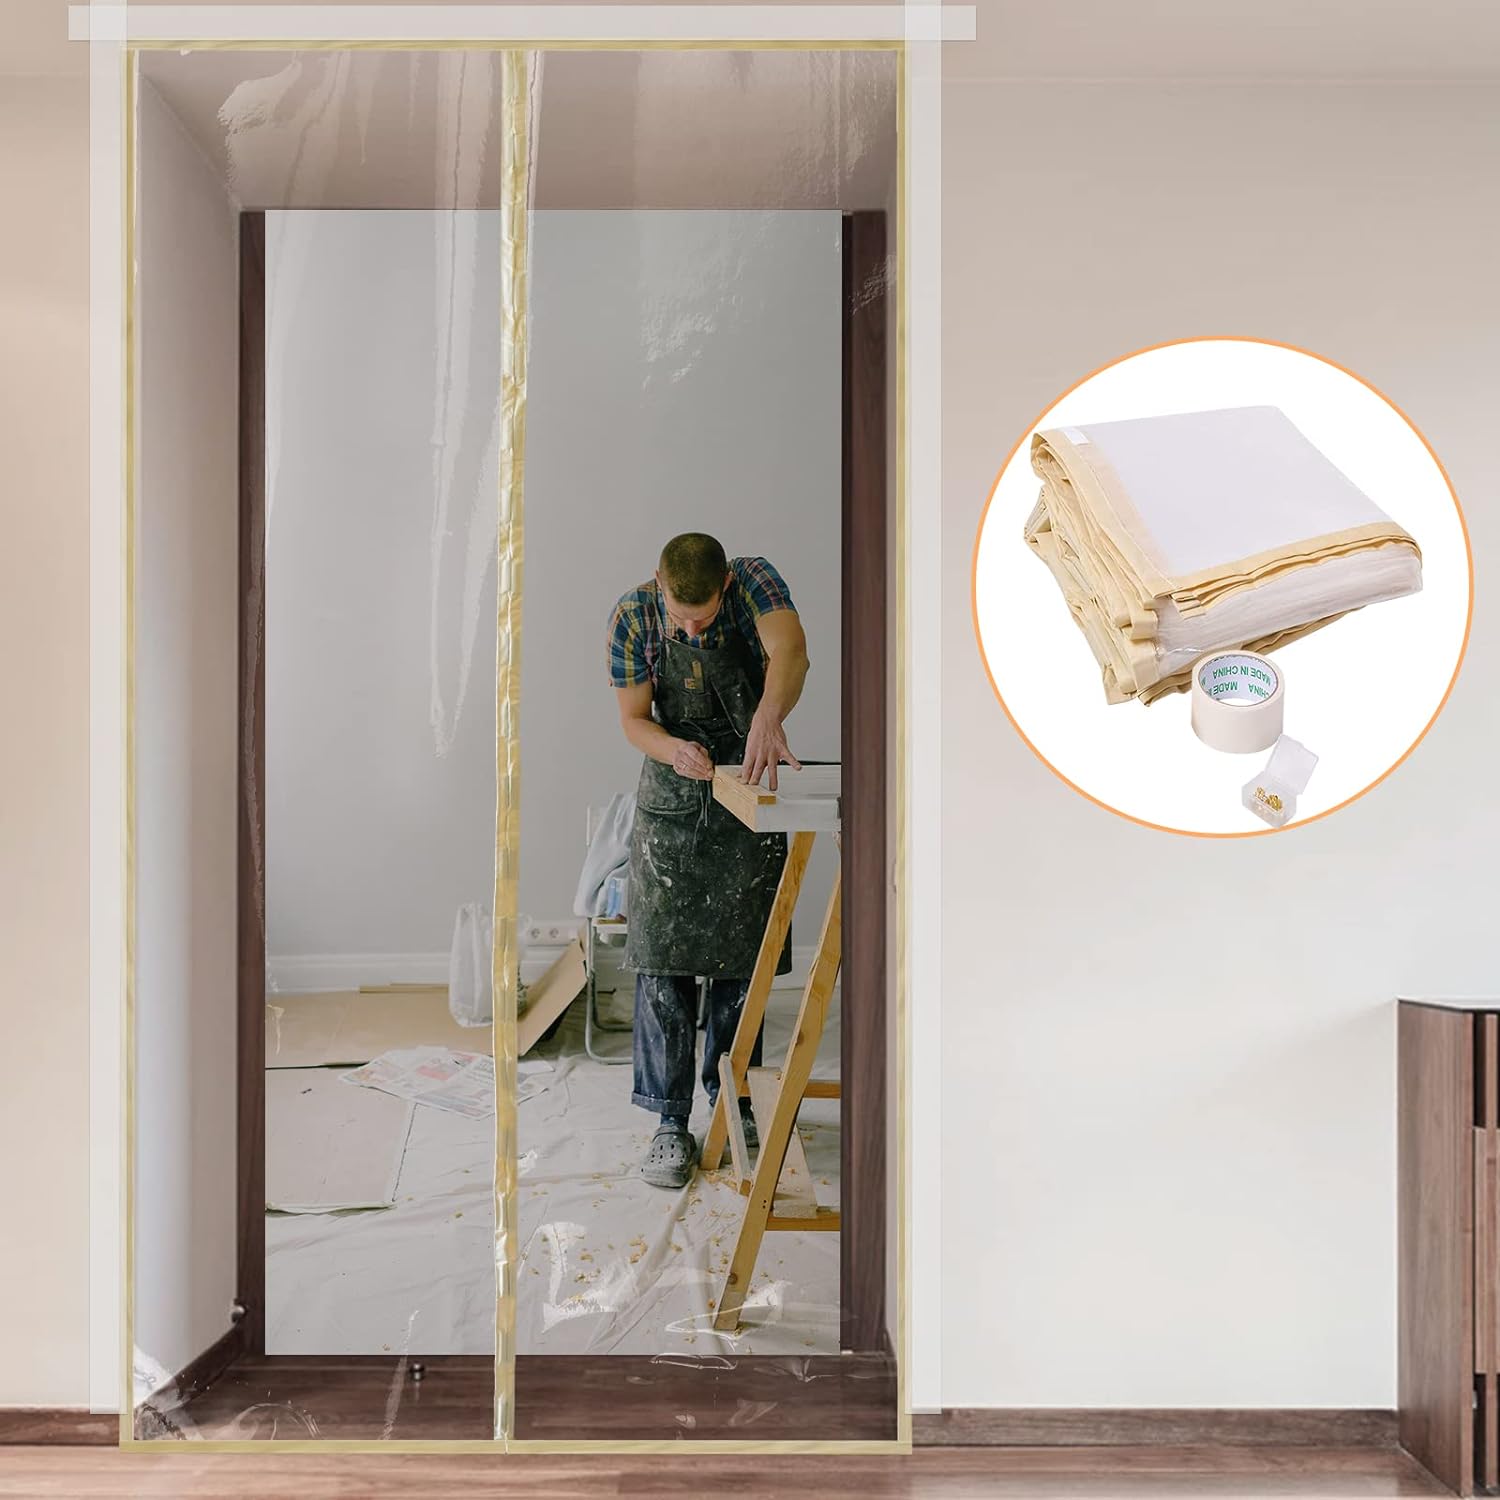 PICK FOR LIFE Dust Barrier, Magnetic Dust Barrier Door Kit for Dust Containment Self-Closing Plastic Sheeting Construction Dust Barrier, Bath